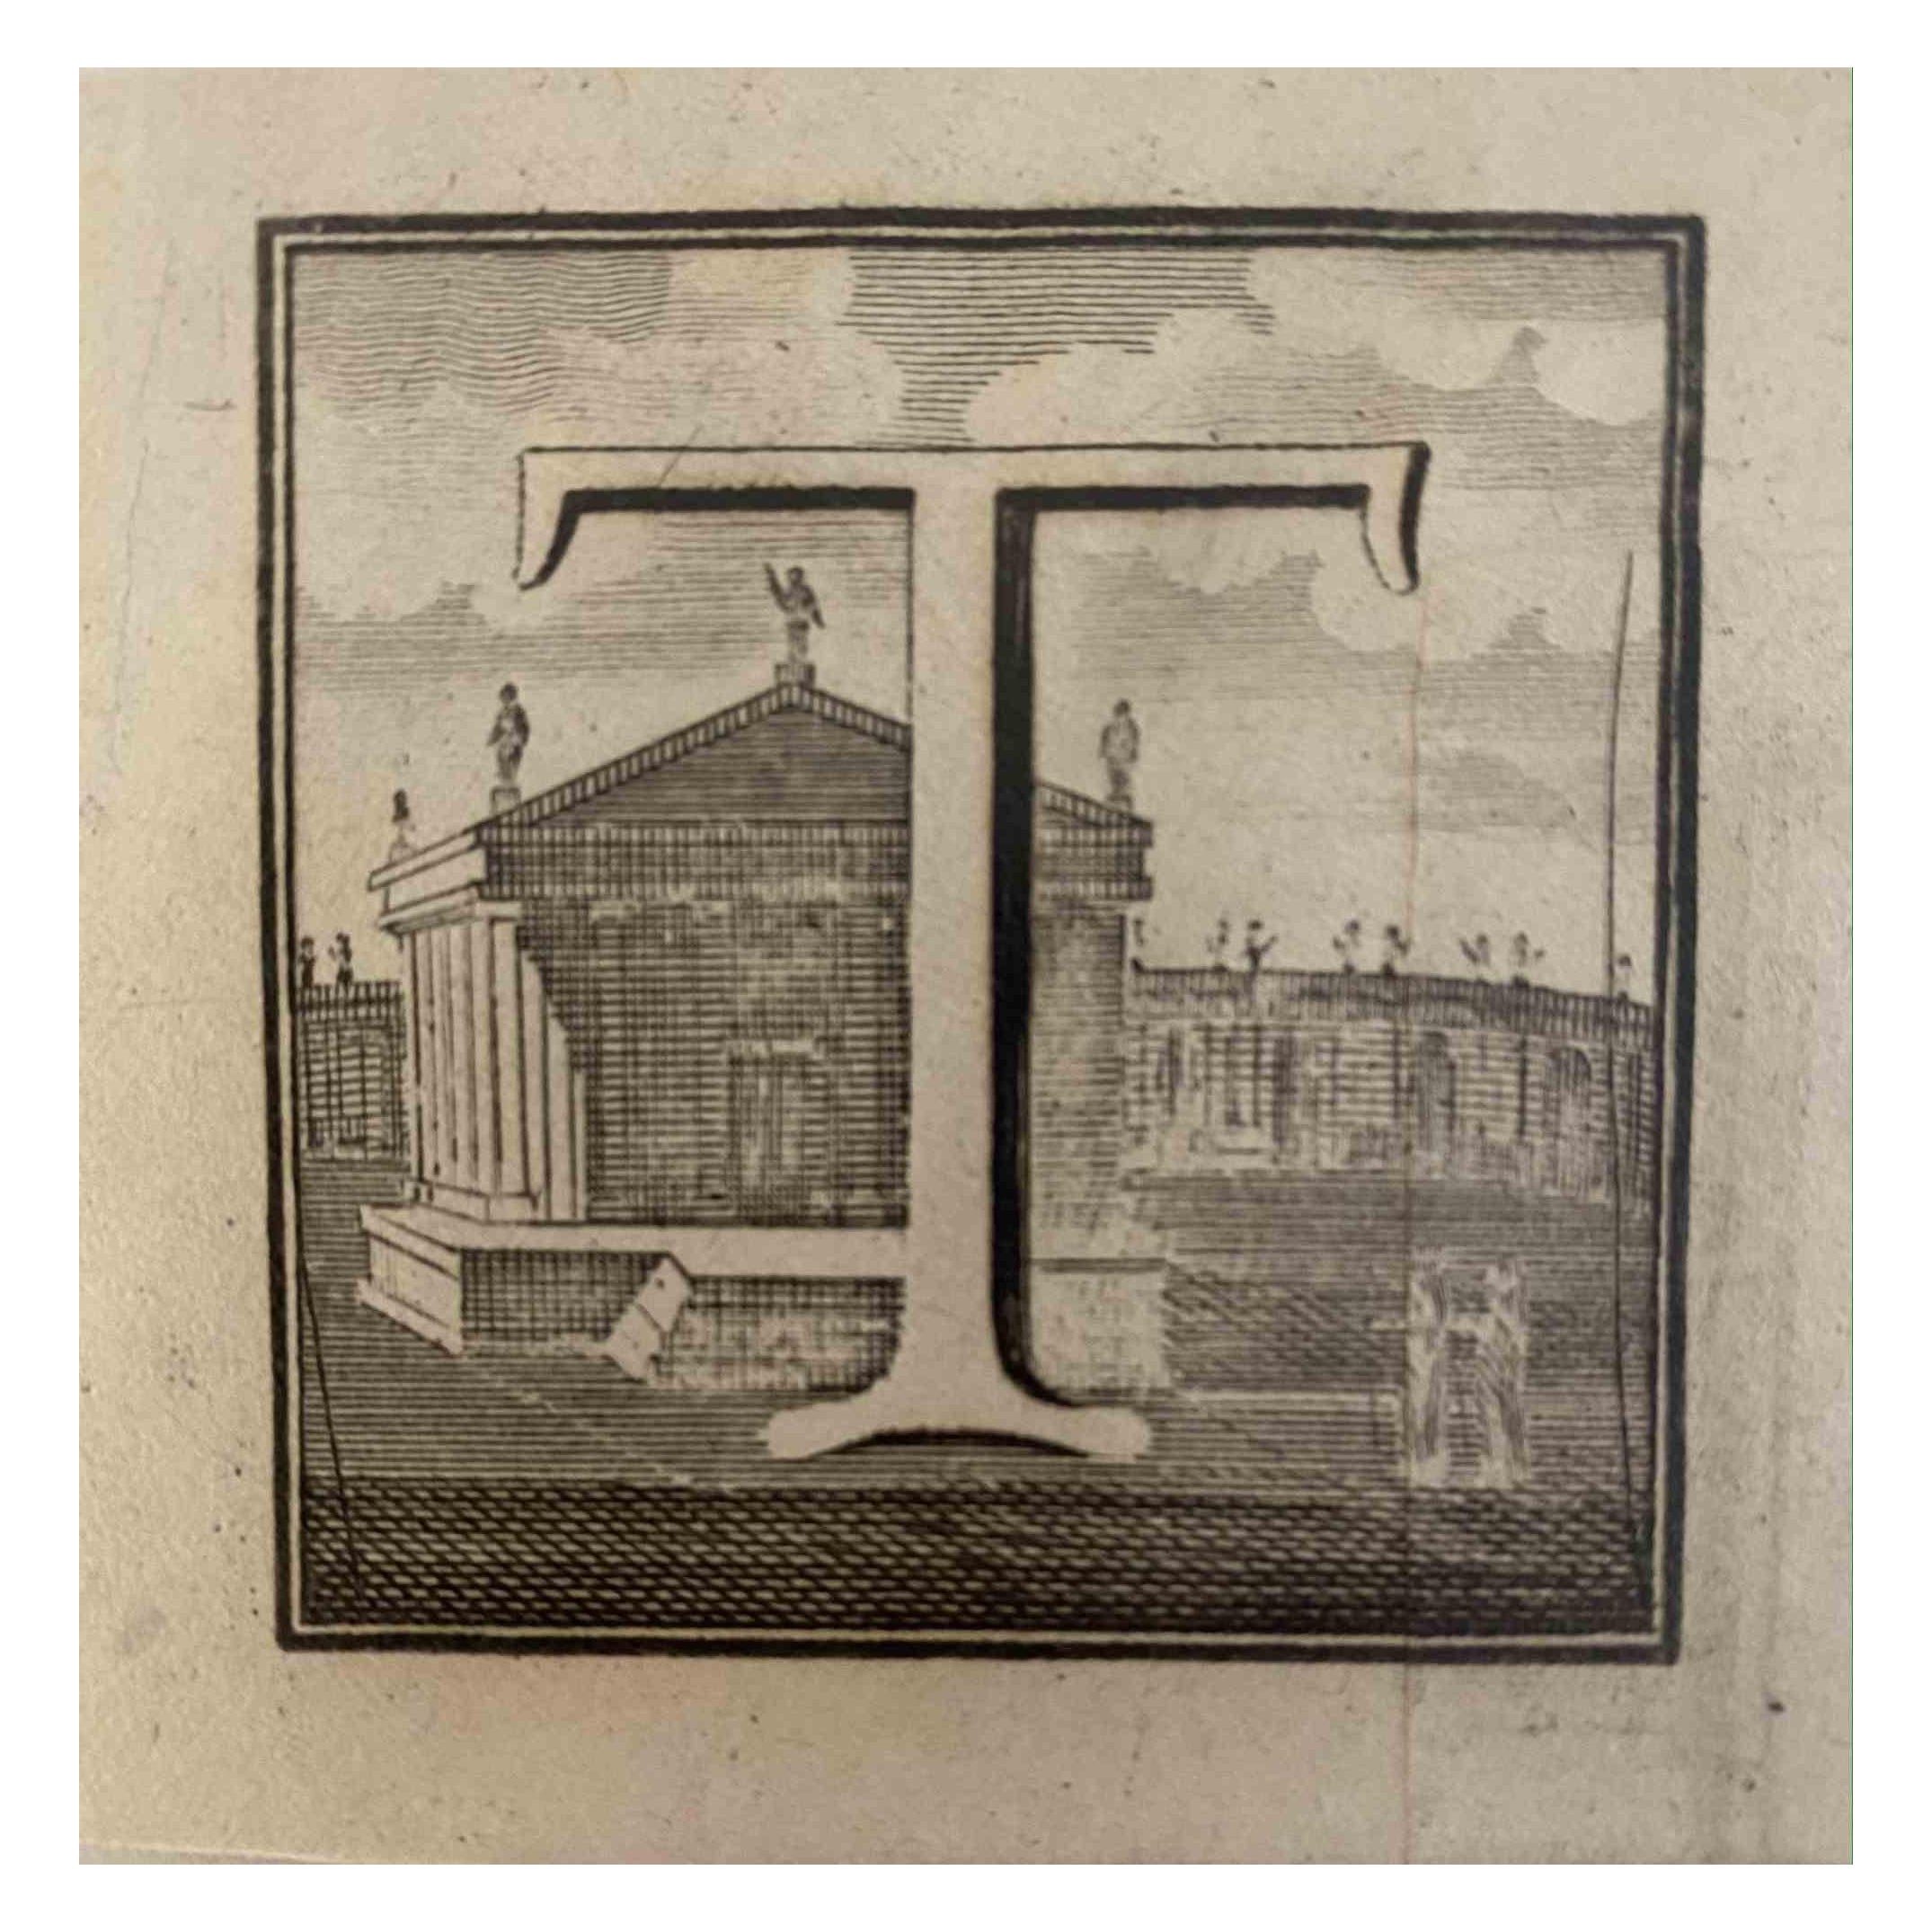 Carlo Nolli Figurative Print - Antiquities of Herculaneum -  Letter of the Alphabet  T -Etching - 18th Century